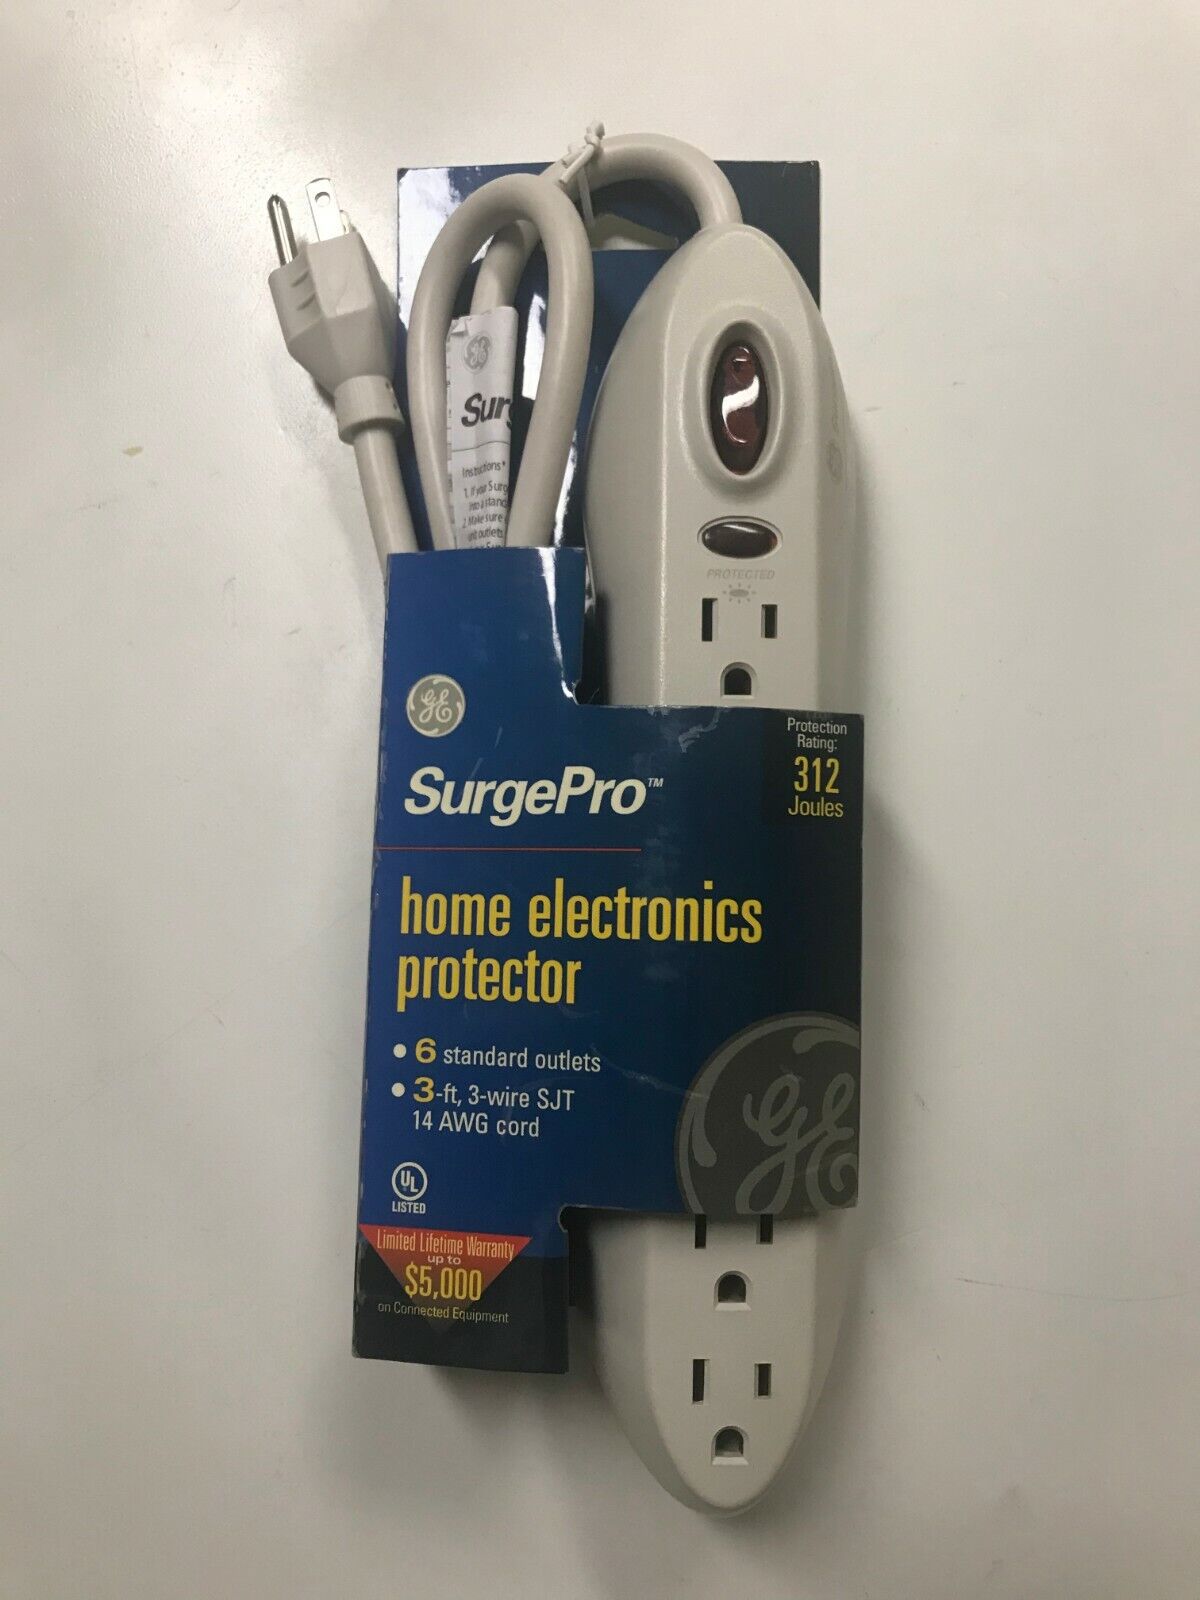 GE SurgePro 6-Outlet Home Electronics Protector 312 Joules, 3-ft. 14 AWG 3-wire